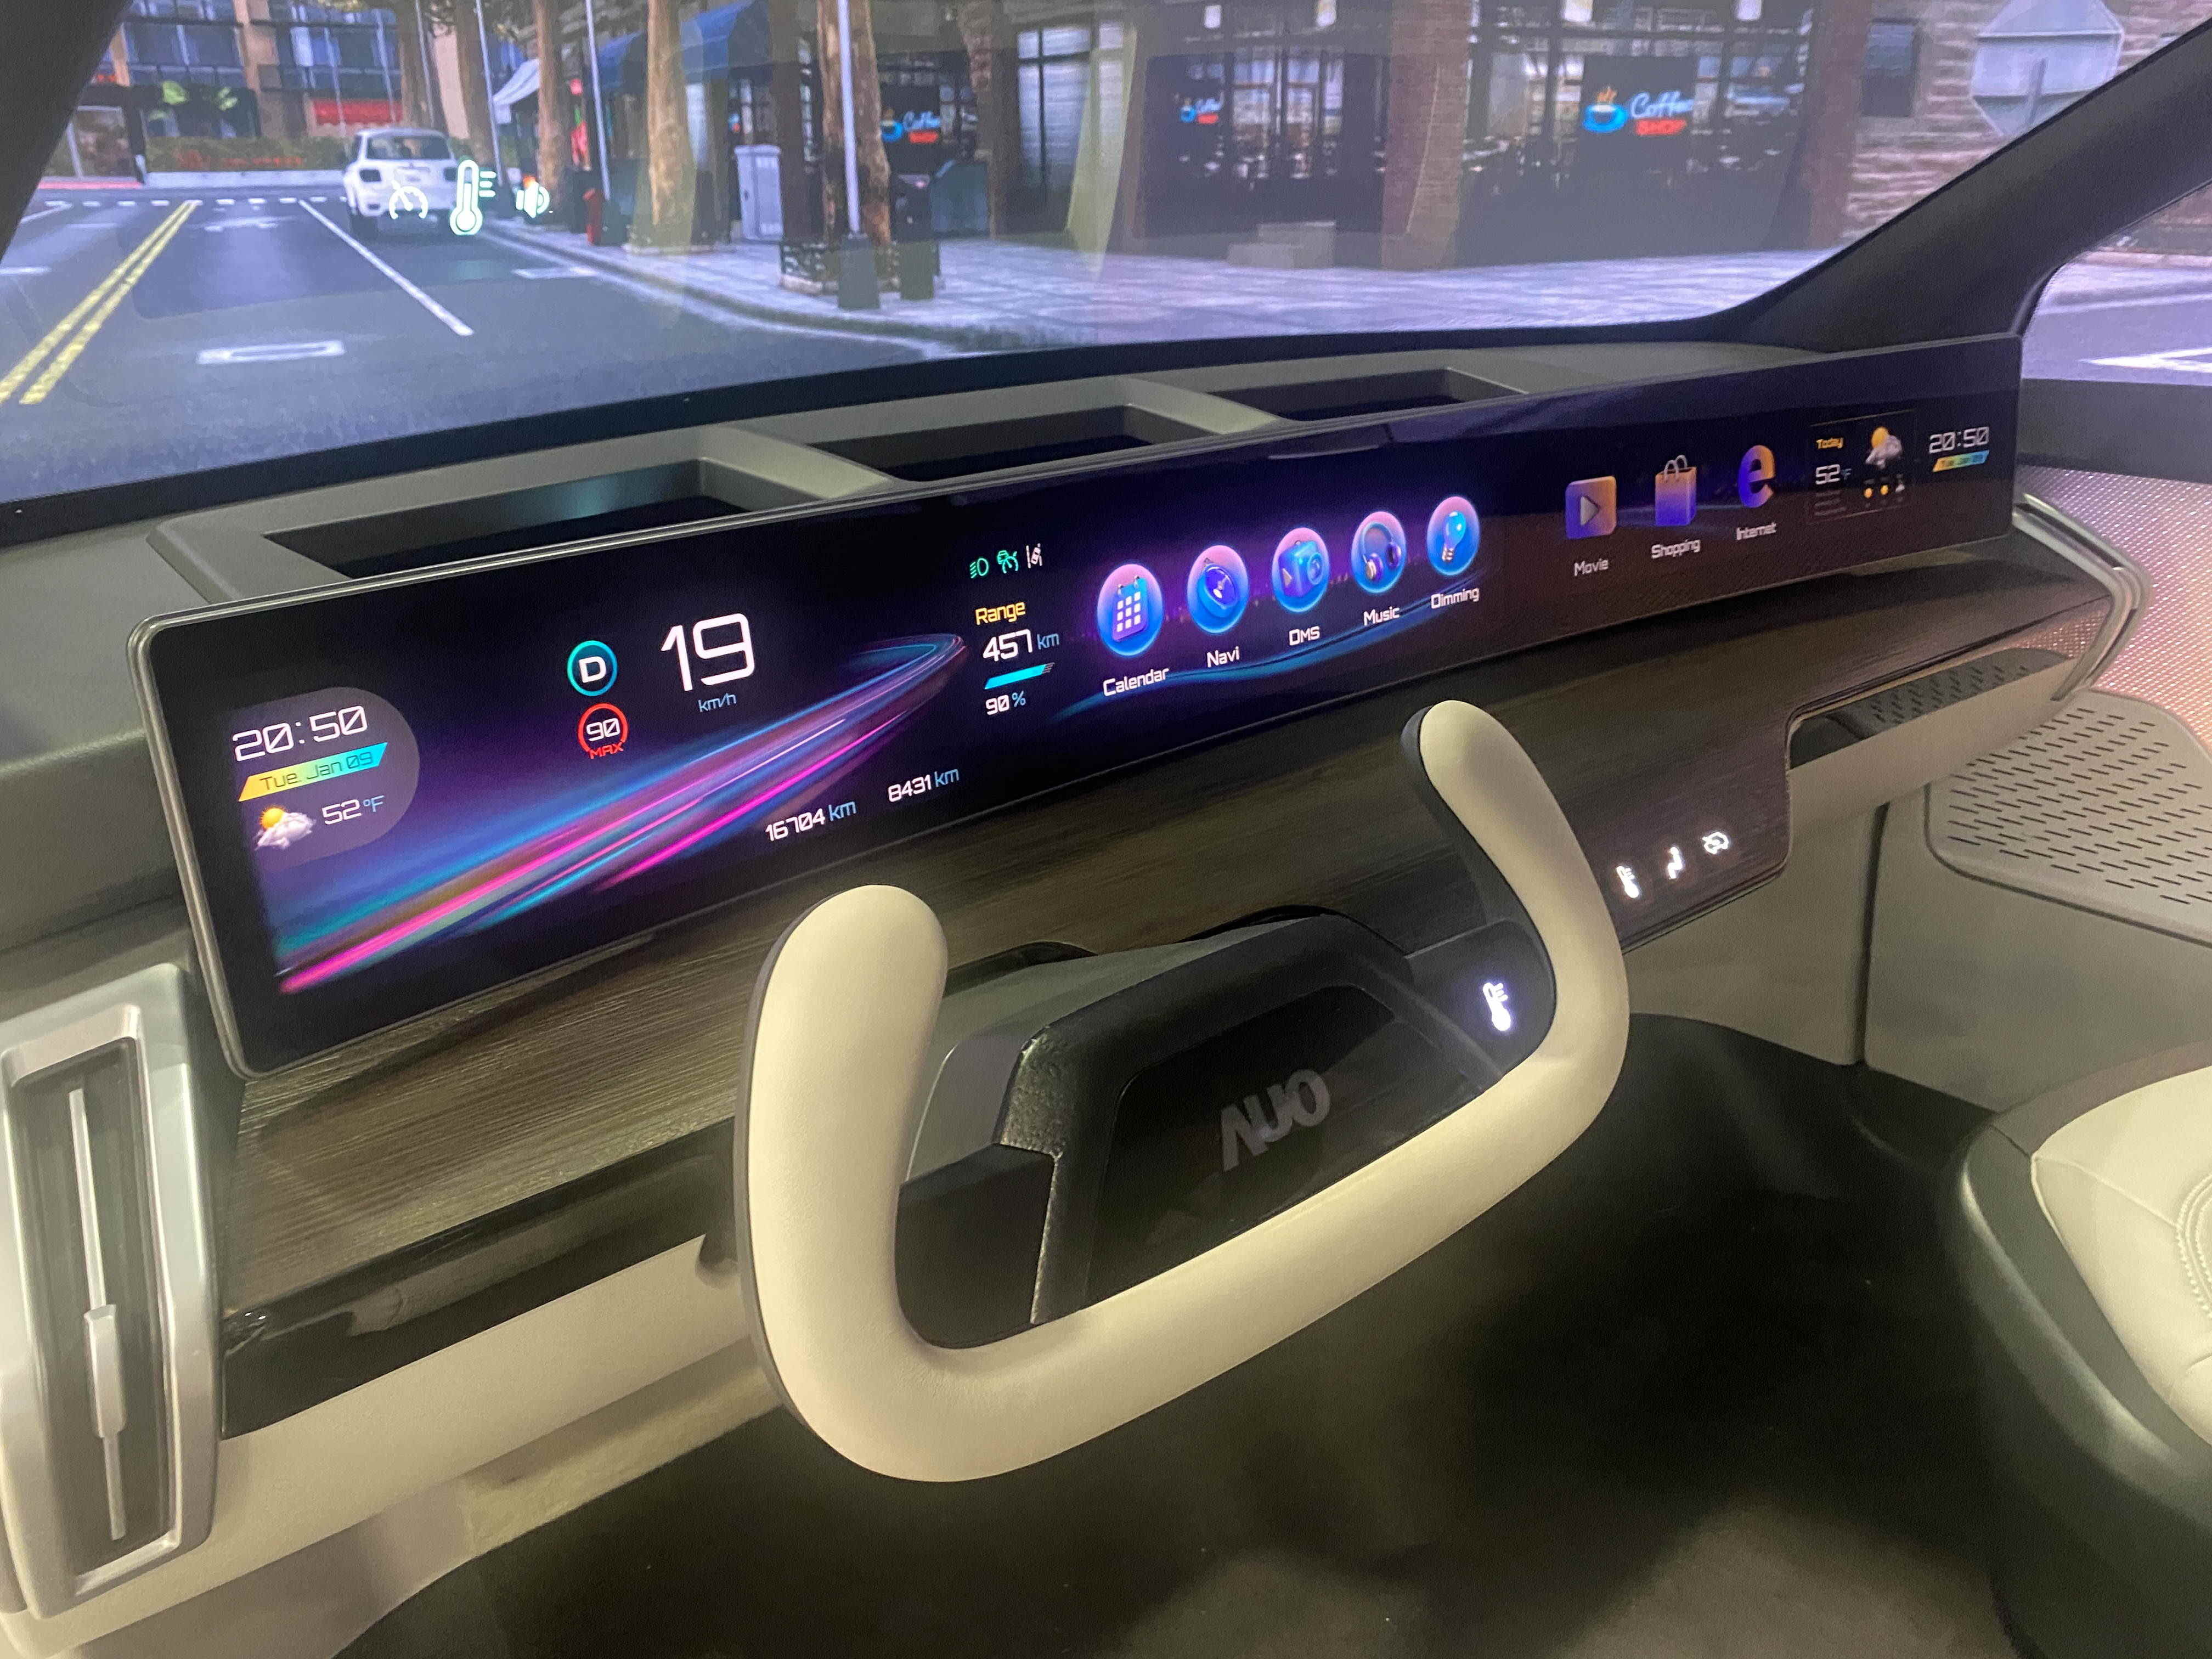 AUO combines the Intuitive Steering Wheel Touch Control with the Immersive Panoramic HUD to provide a seamless and safe interface for drivers to access vehicle controls and information while keeping their focus on the road.